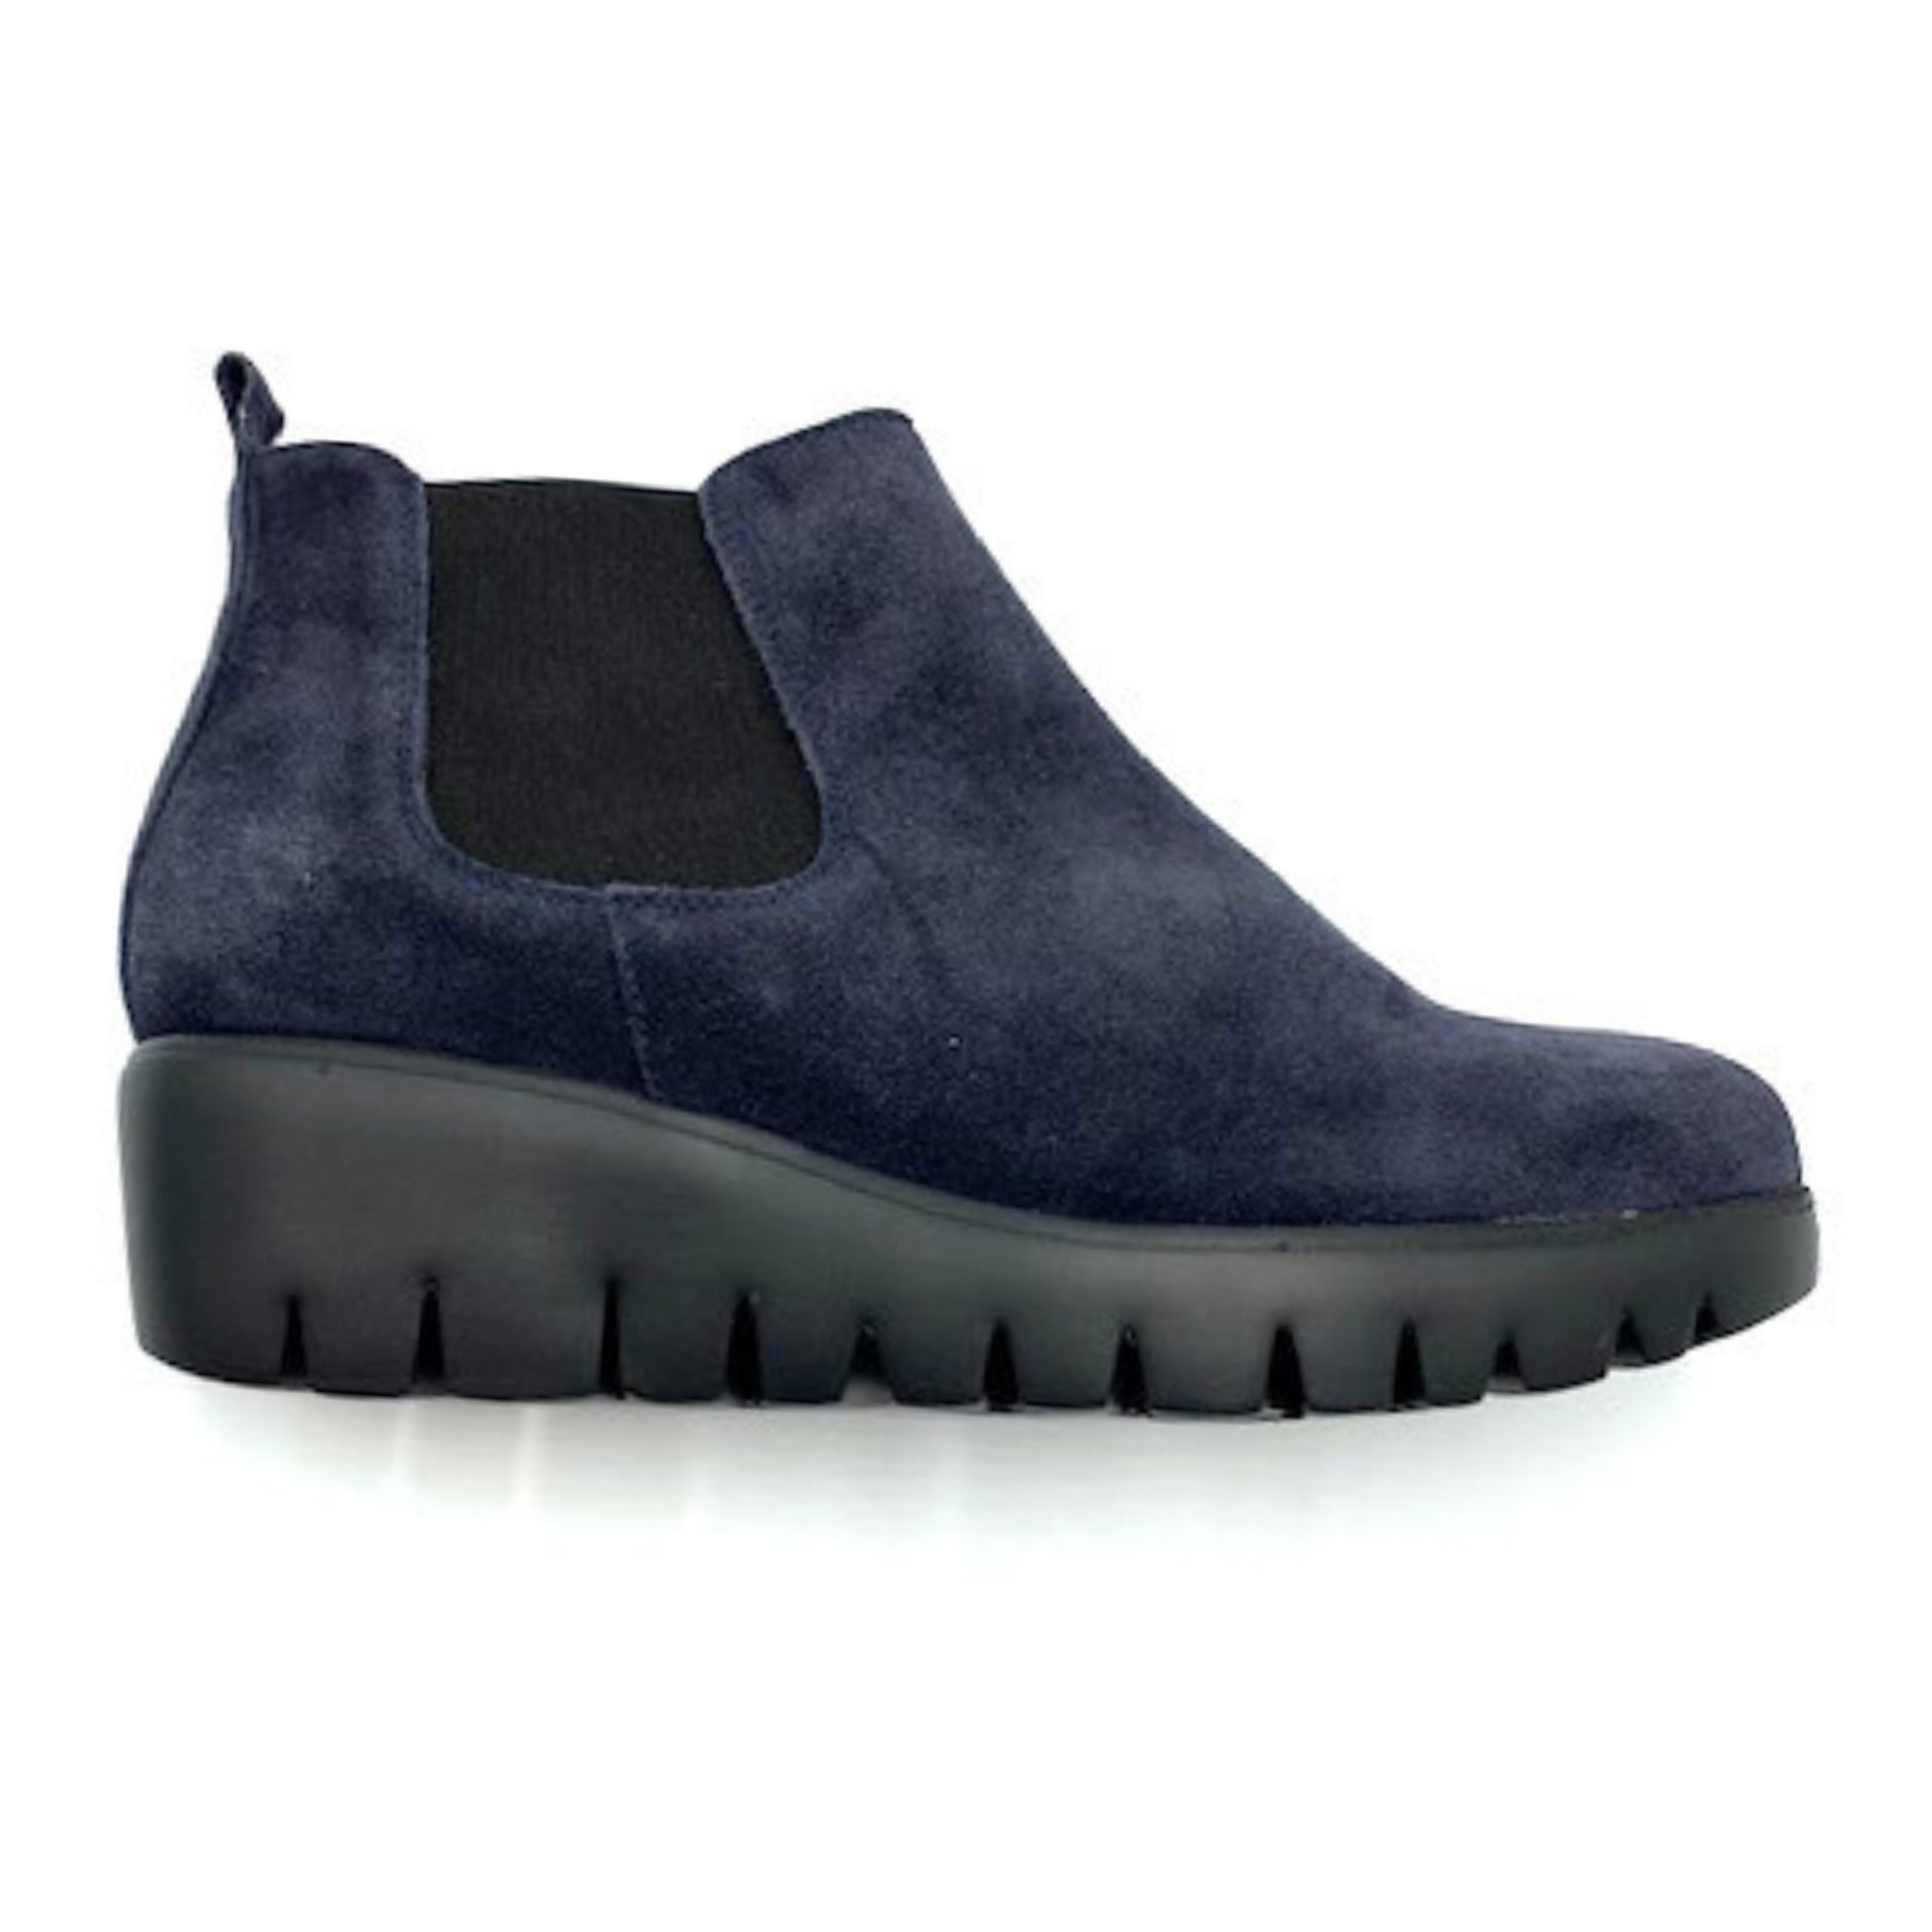 Suede dark blue chelsea boot with thick platform sole and black elastic side cut out pictured in profile.